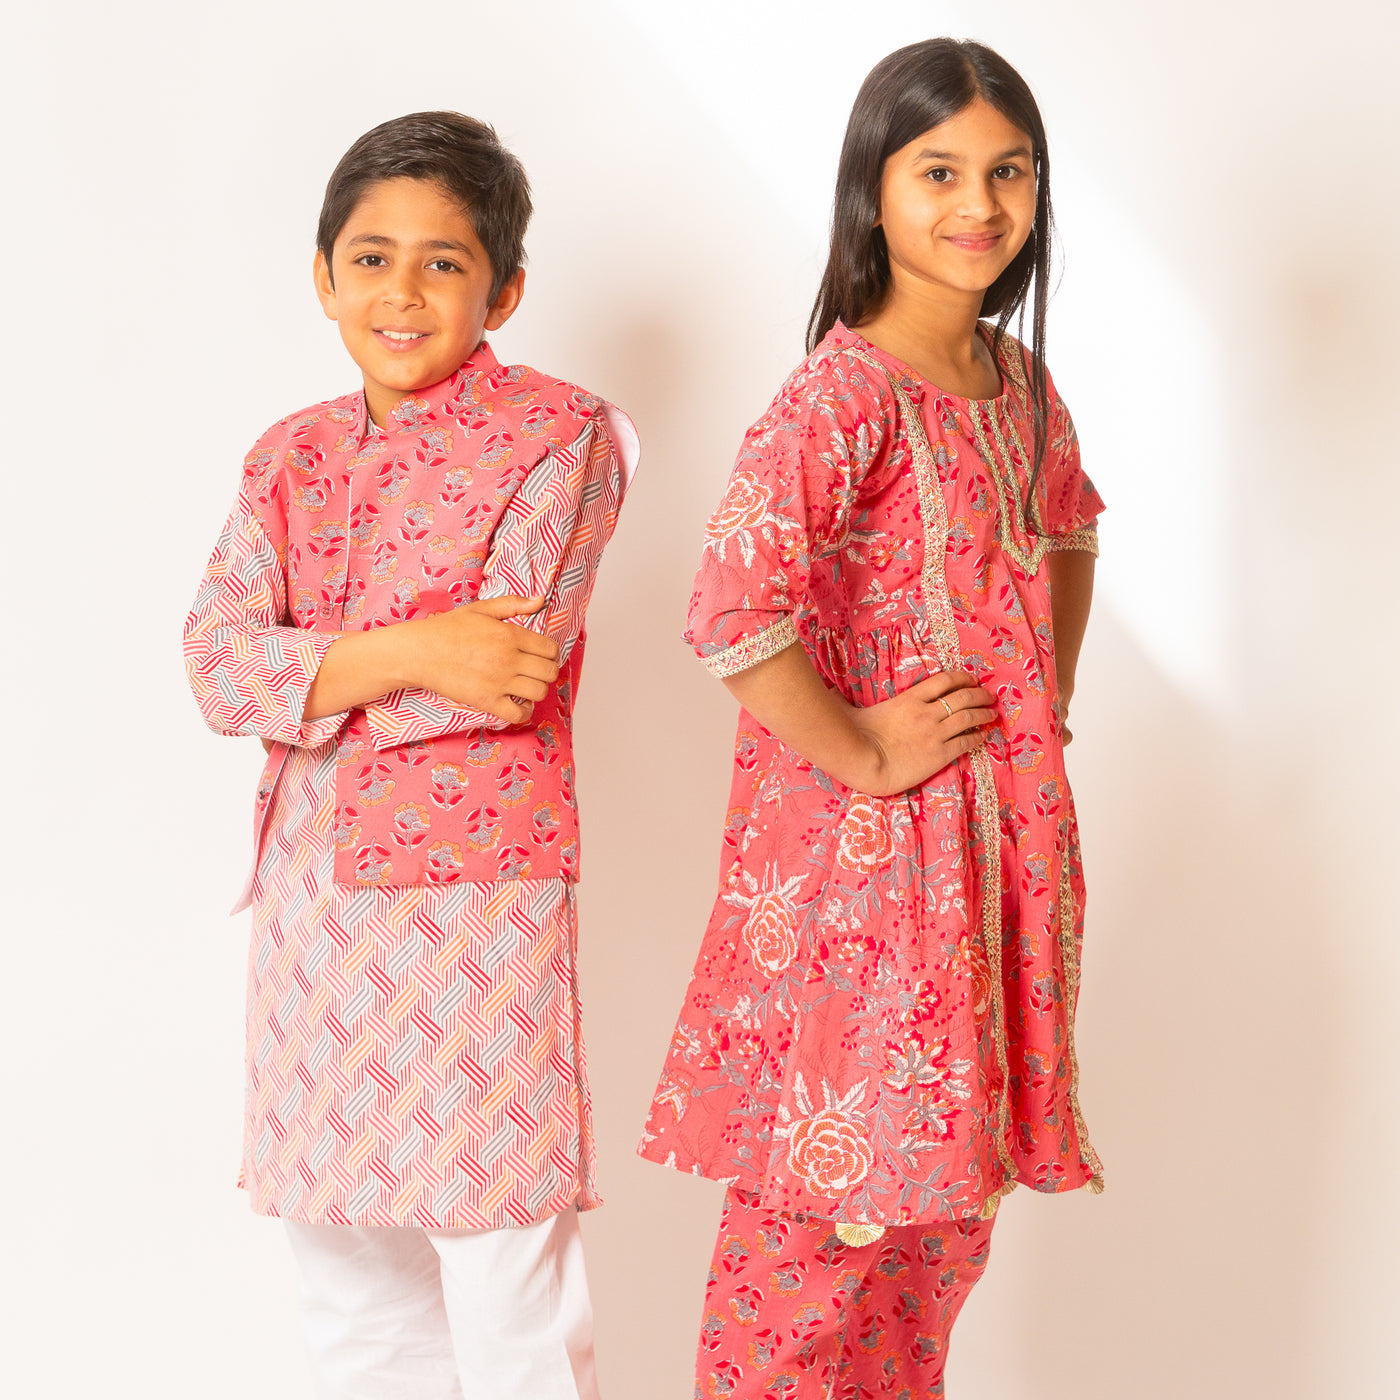 Siblings Set -Coral and Floral Ensemble for Girls and Boys